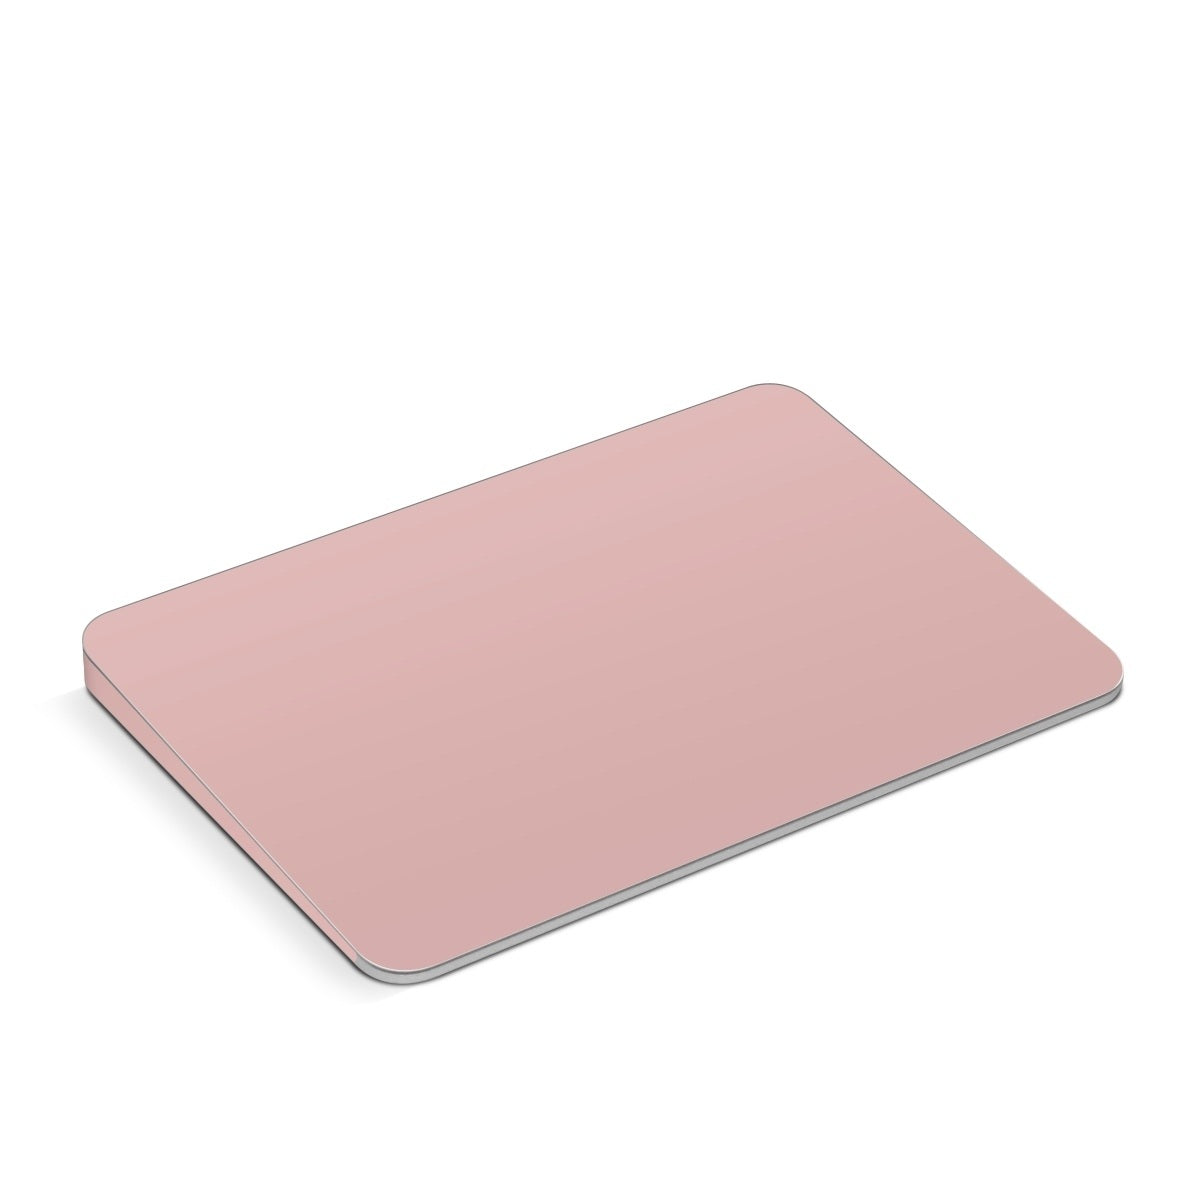 Solid State Faded Rose - Apple Magic Trackpad Skin